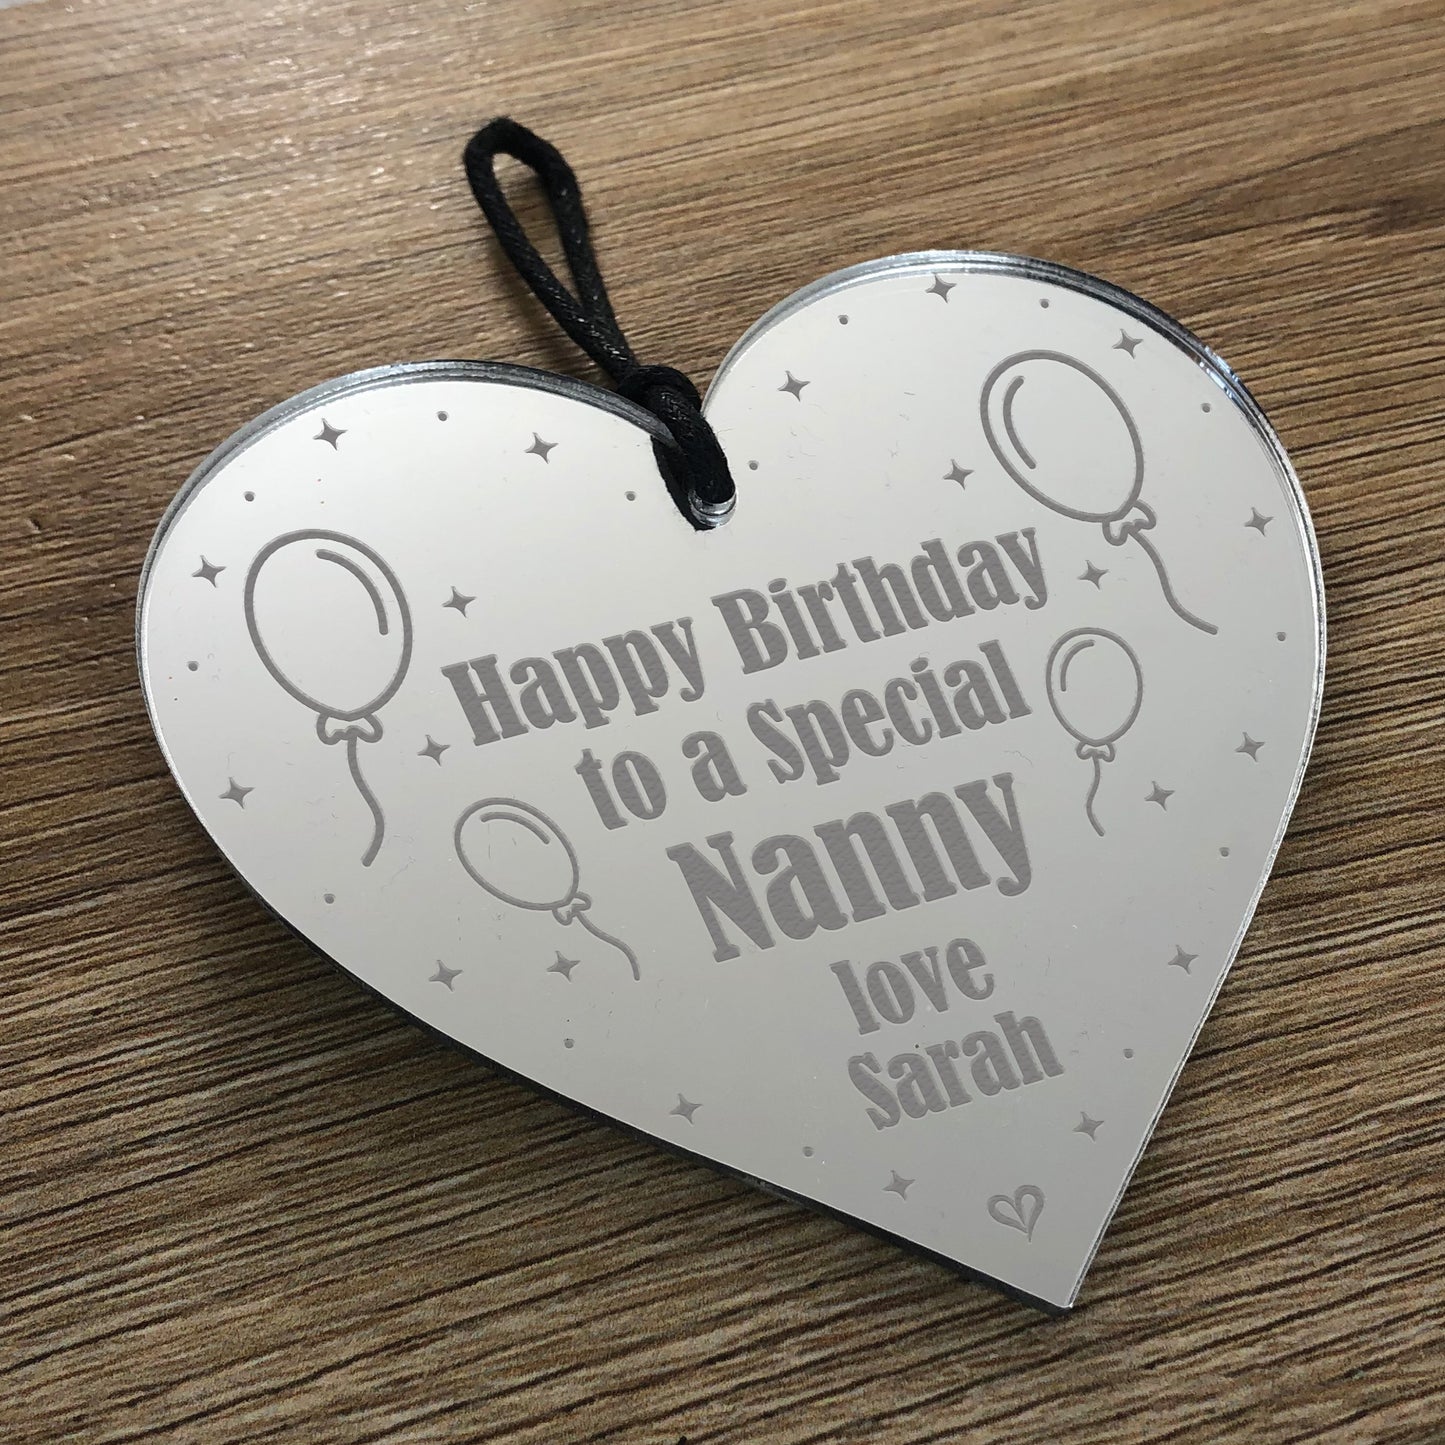 Birthday Gift For Nanny Personalised Engraved Heart Gift